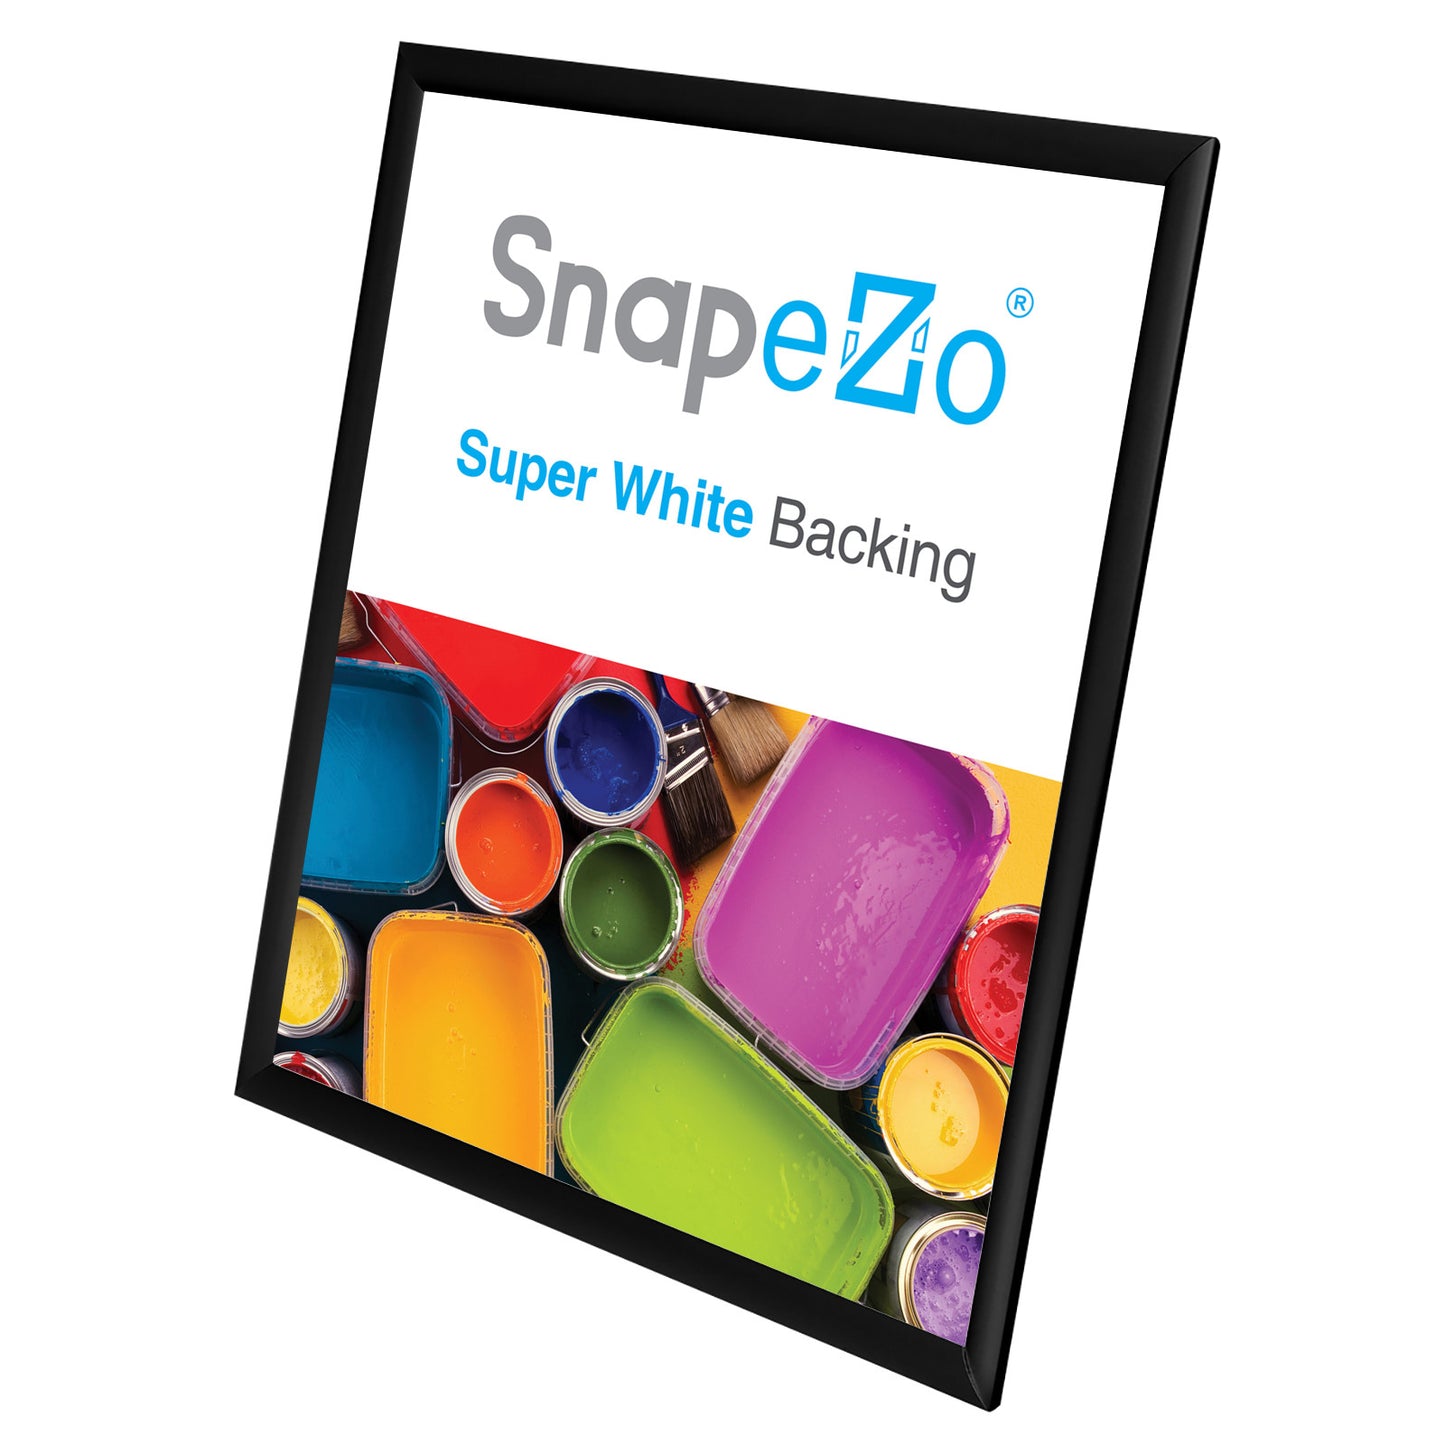 10 Case Pack of Snapezo® of Black 22x28 Poster Frame - 1" Profile